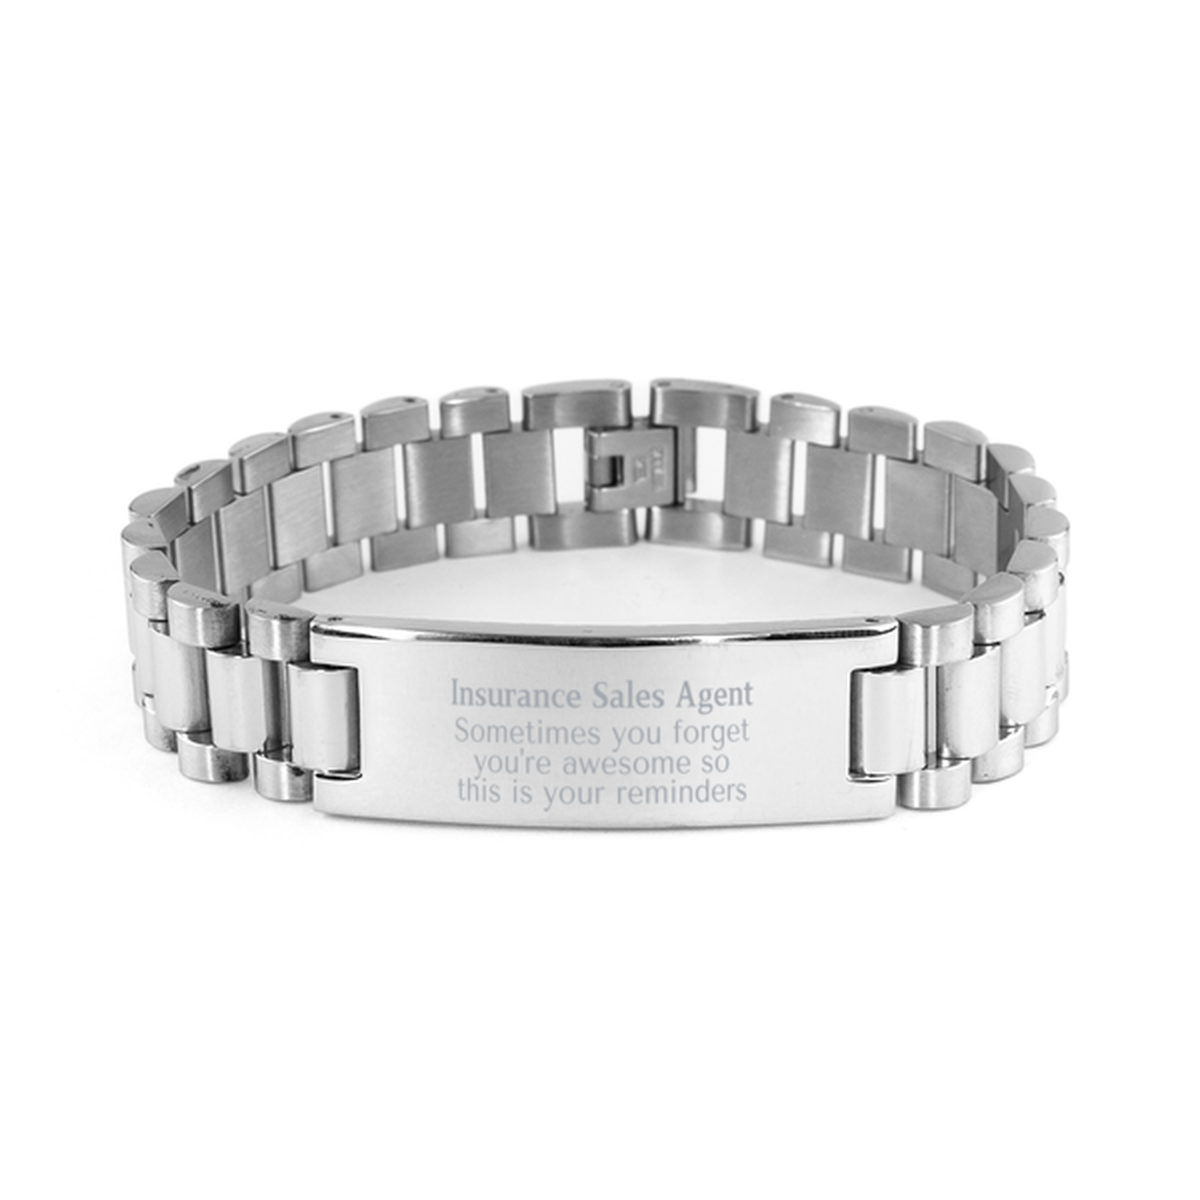 Sentimental Insurance Sales Agent Ladder Stainless Steel Bracelet, Insurance Sales Agent Sometimes you forget you're awesome so this is your reminders, Graduation Christmas Birthday Gifts for Insurance Sales Agent, Men, Women, Coworkers